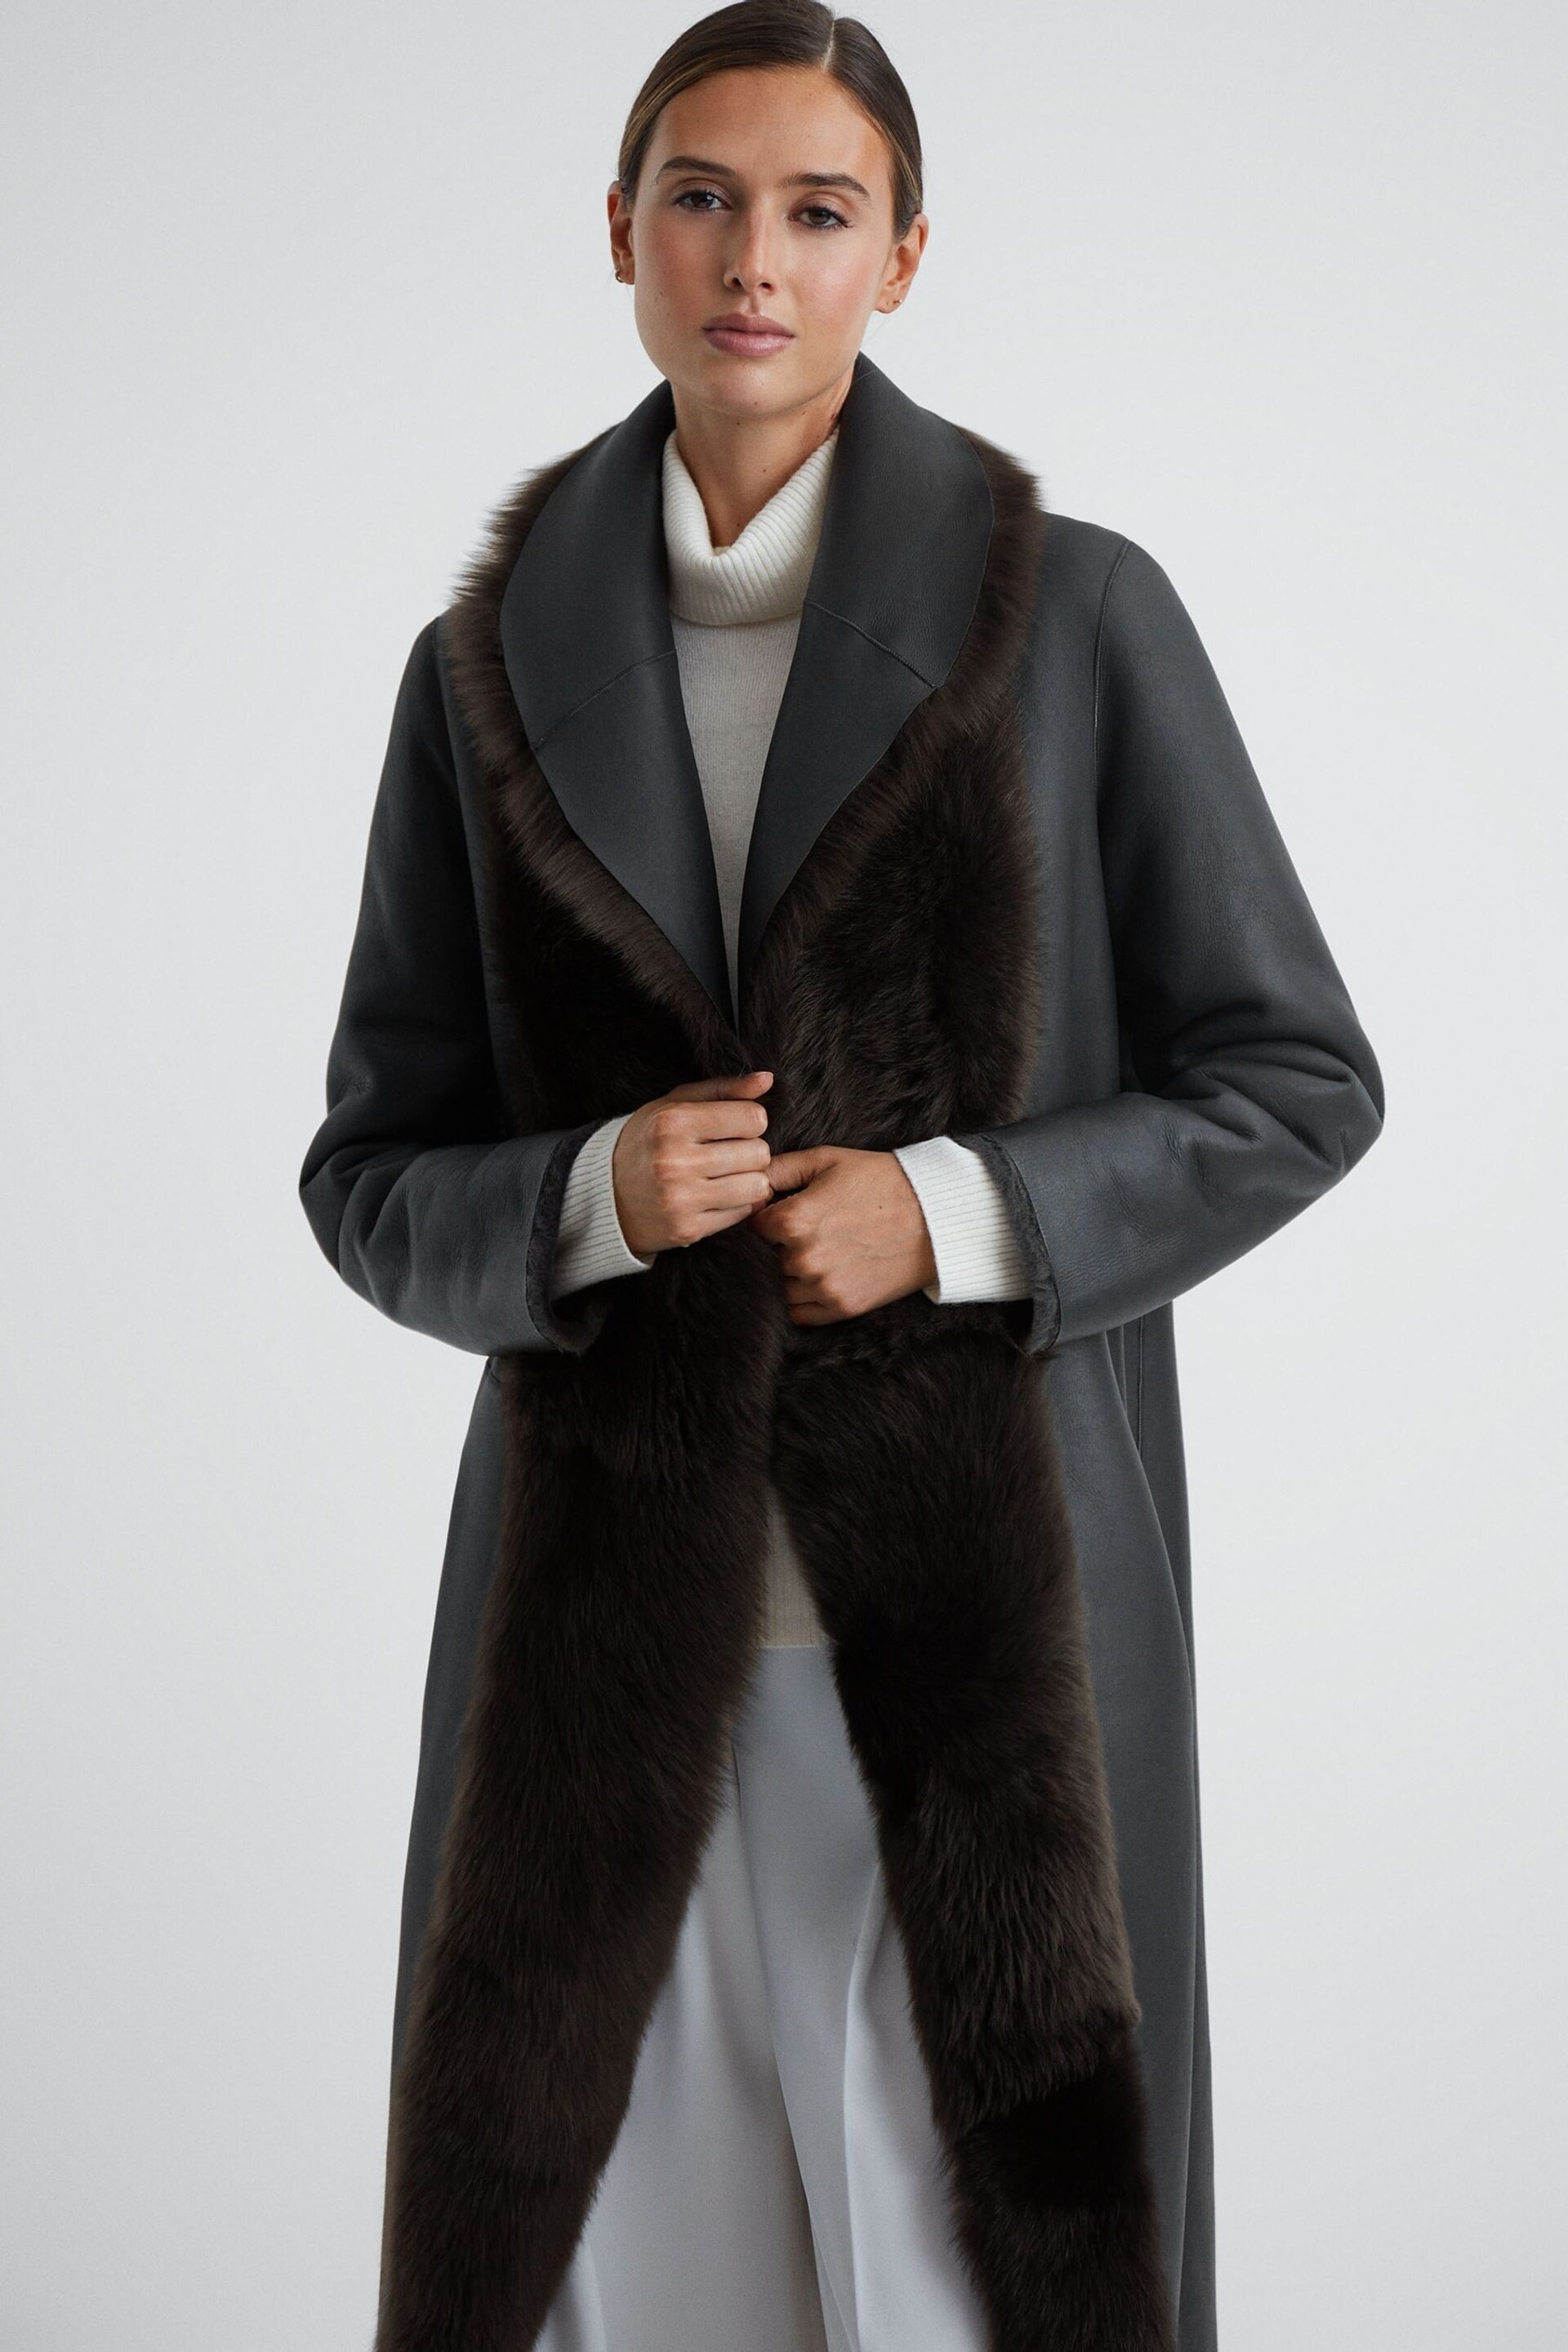 Reiss Brown Dahlia Reversible Longline Leather Shearling Coat - Image 3 of 7